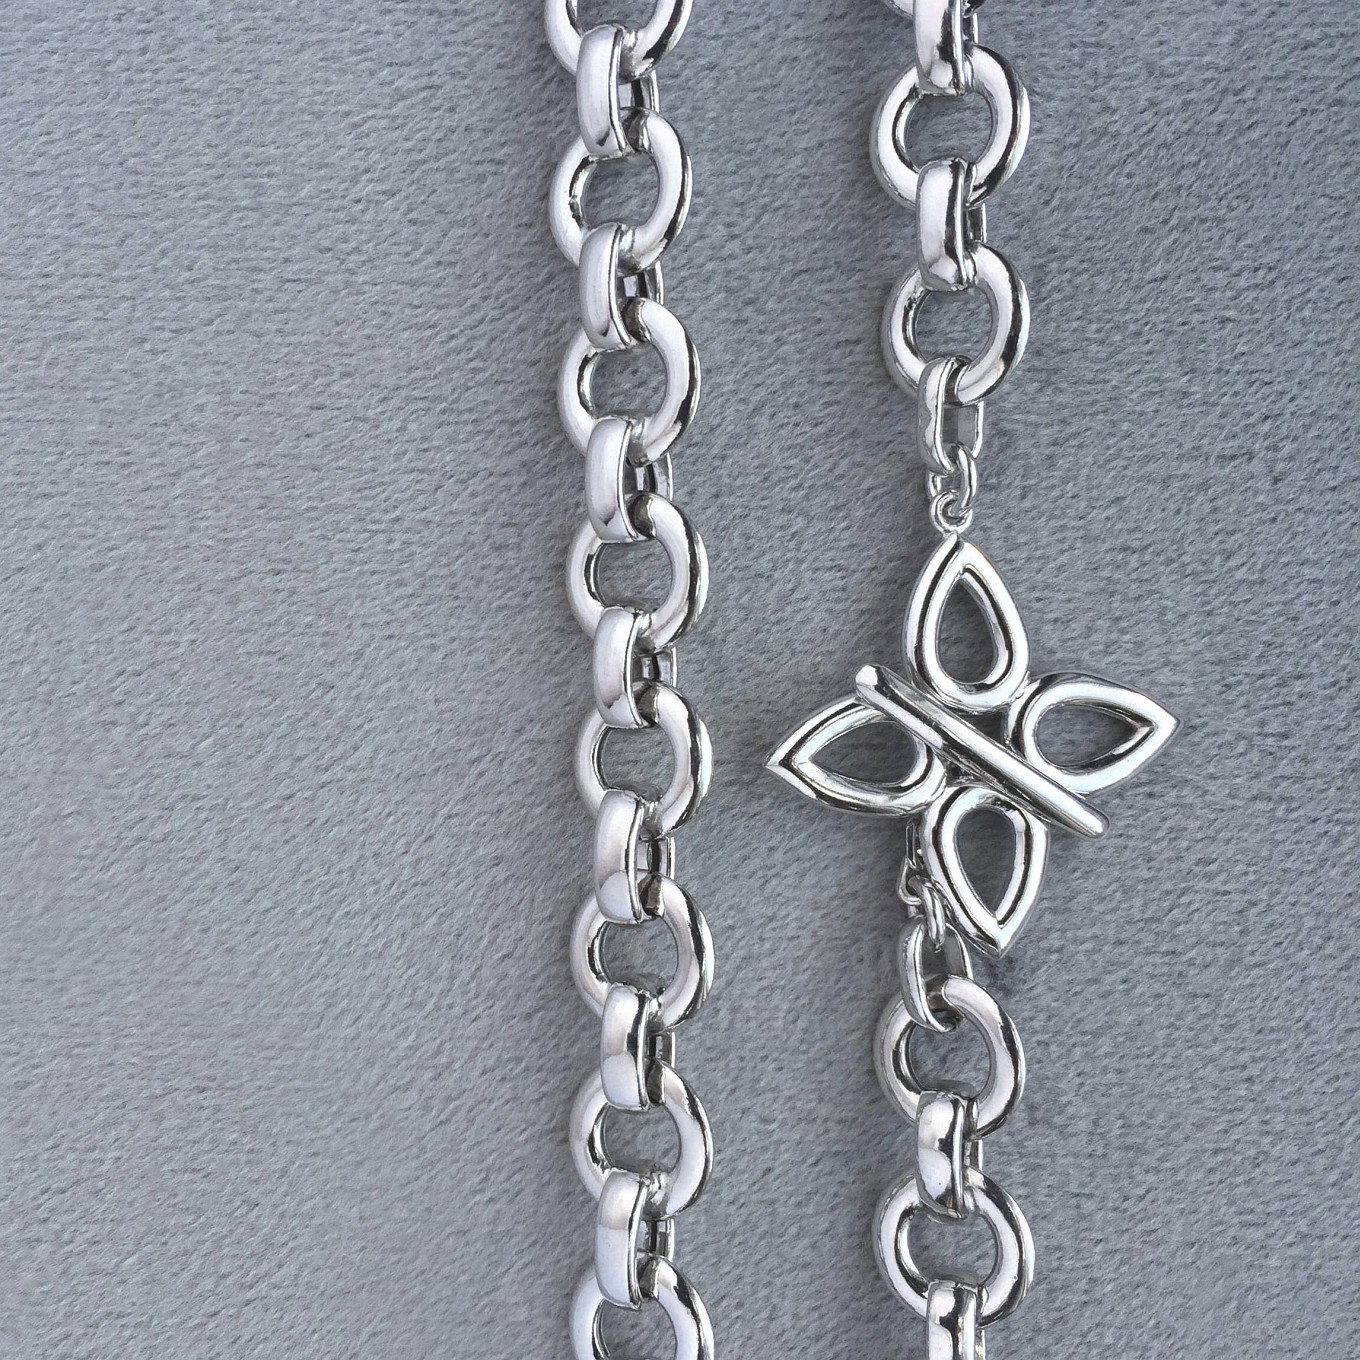 "Cable" necklace in sterling silver with sevilla motif clasp